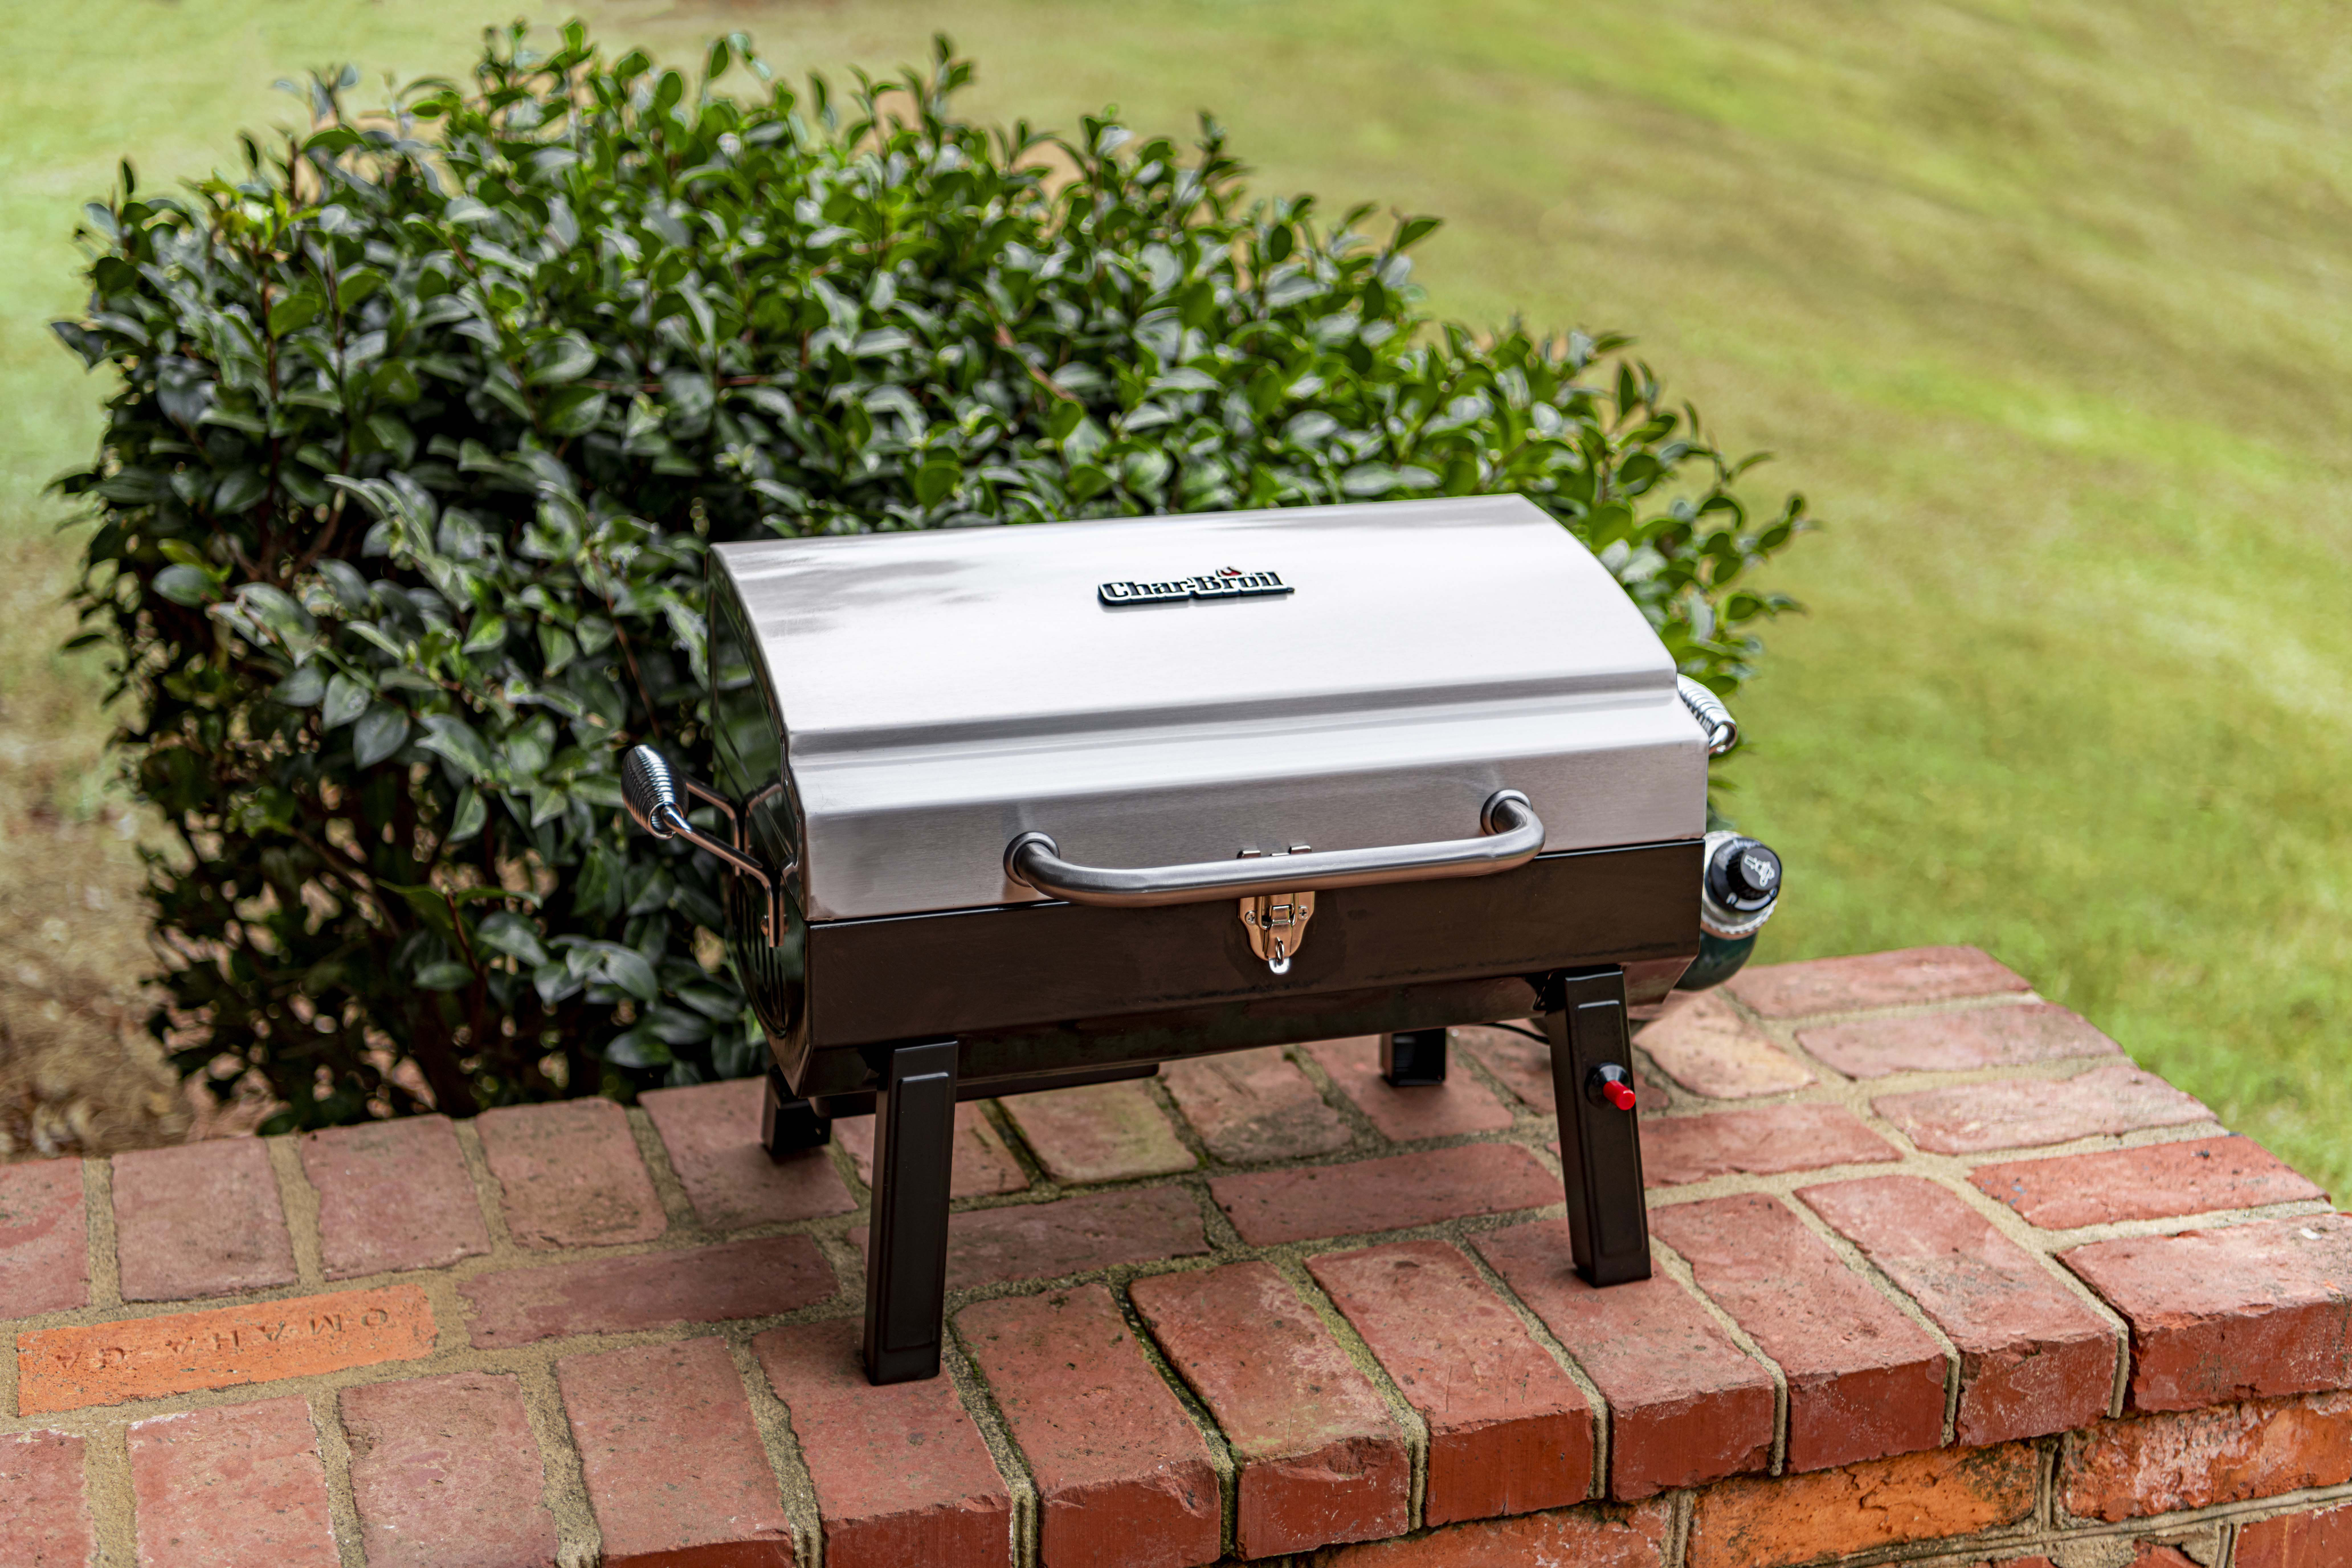 Char-Broil 200 Liquid Propane, (LP), Portable Stainless Steel Gas Grill - image 8 of 8